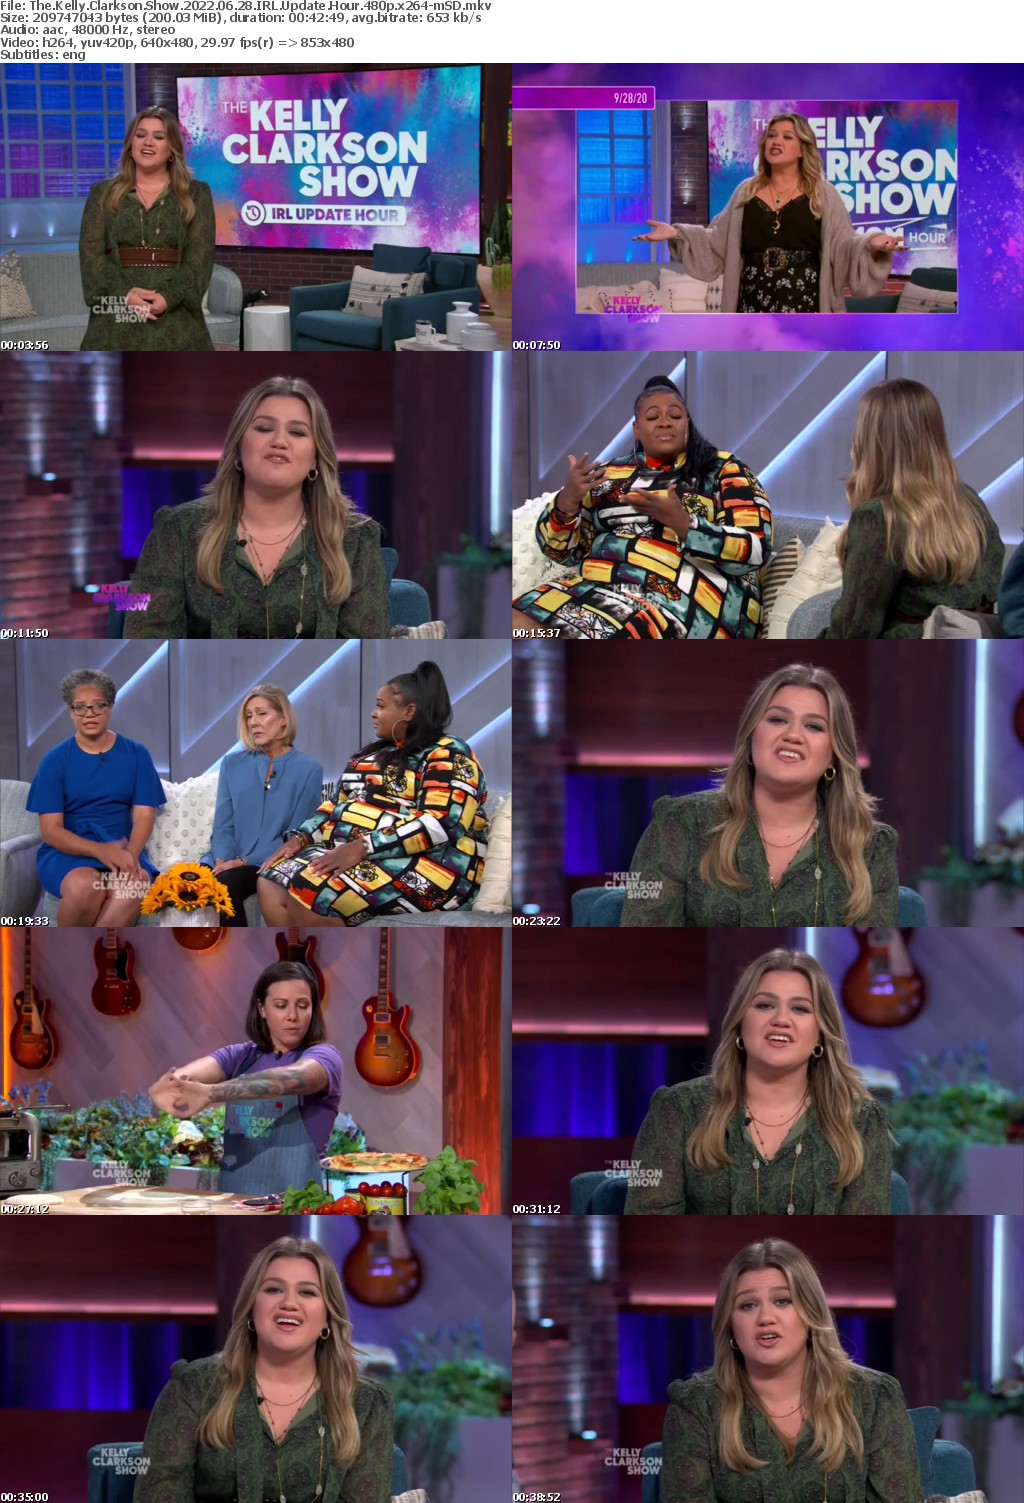 The Kelly Clarkson Show 2022 06 28 IRL Update Hour 480p x264-mSD